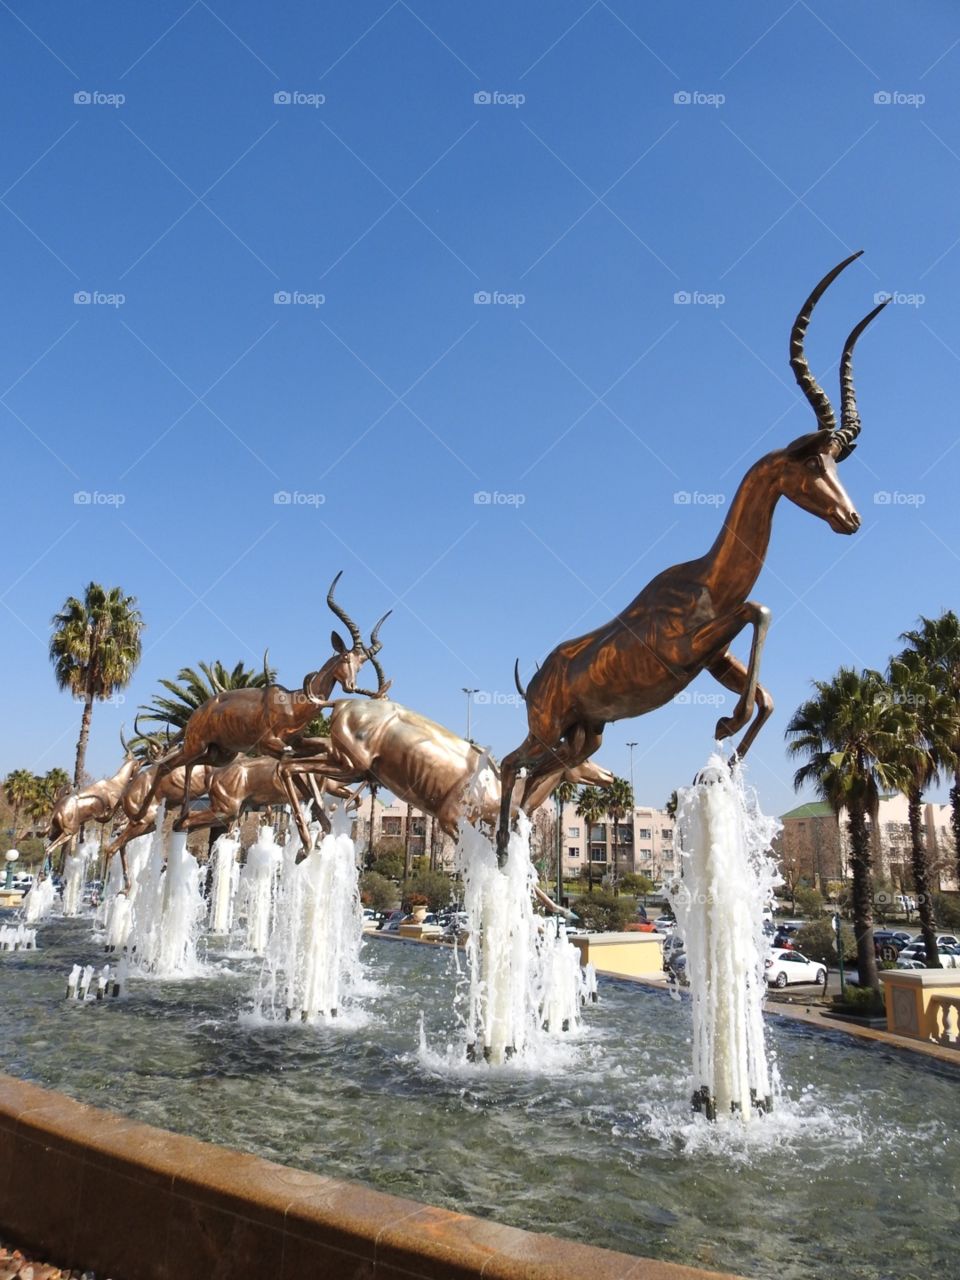 The most beautiful sculpture of golden impala running through the fountains in front of the Gold Reef City Casino, Johannesburg